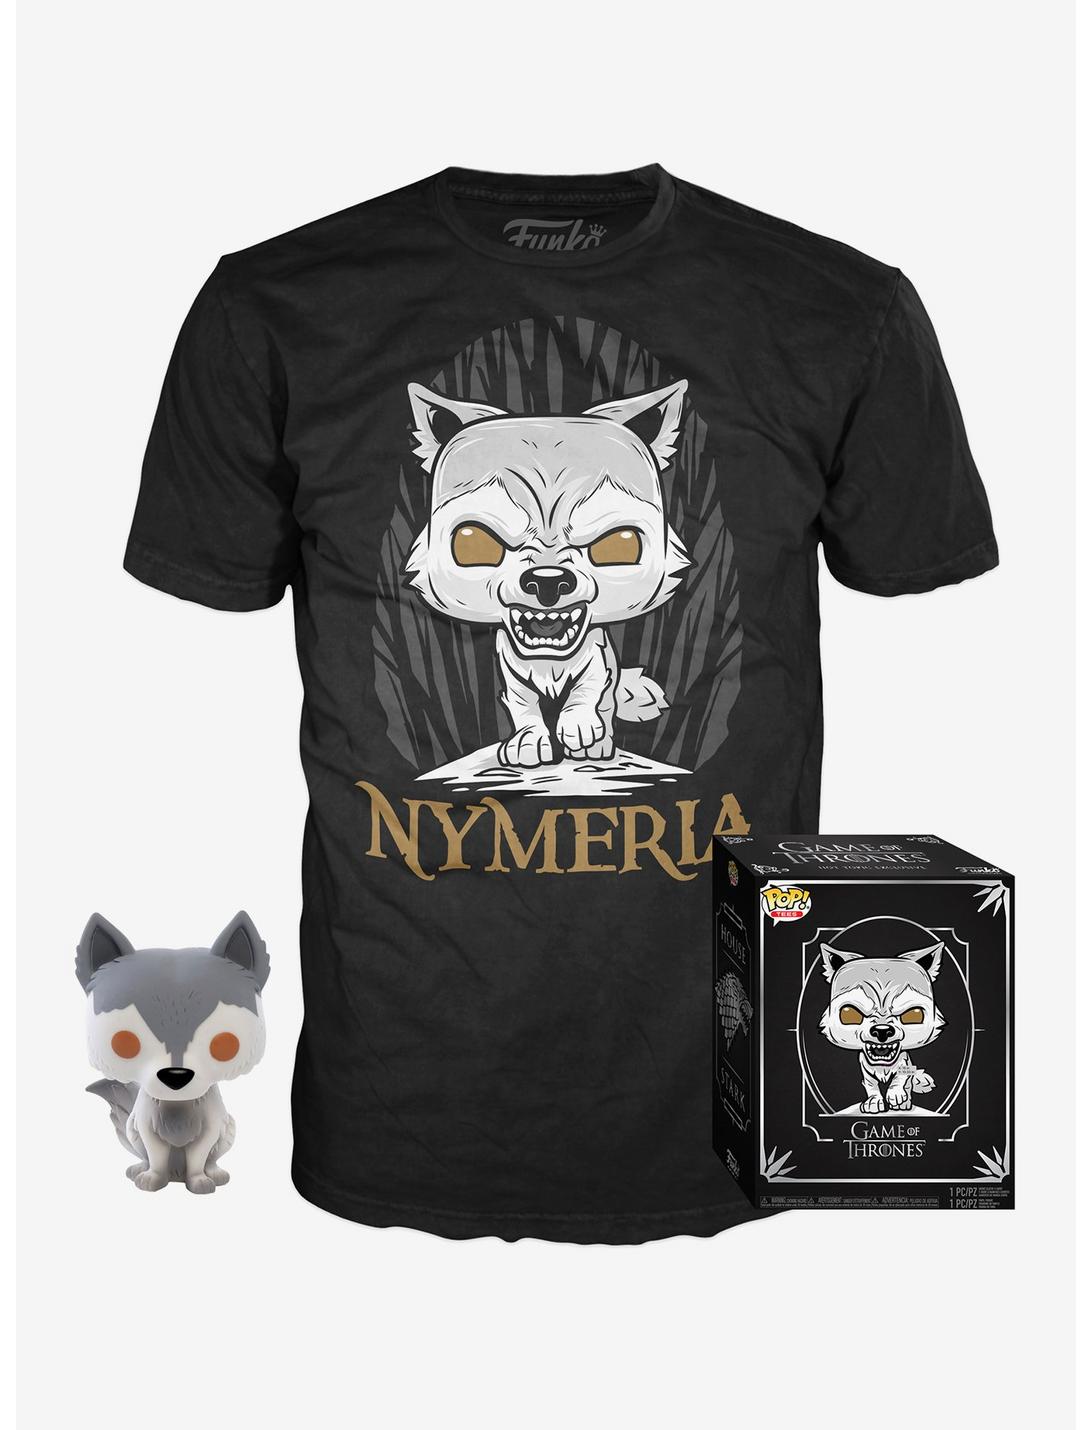 Tees Nymeria XL Shirt ONLY Game of Thrones Hot Topic Exclusive SEALED Funko Pop 